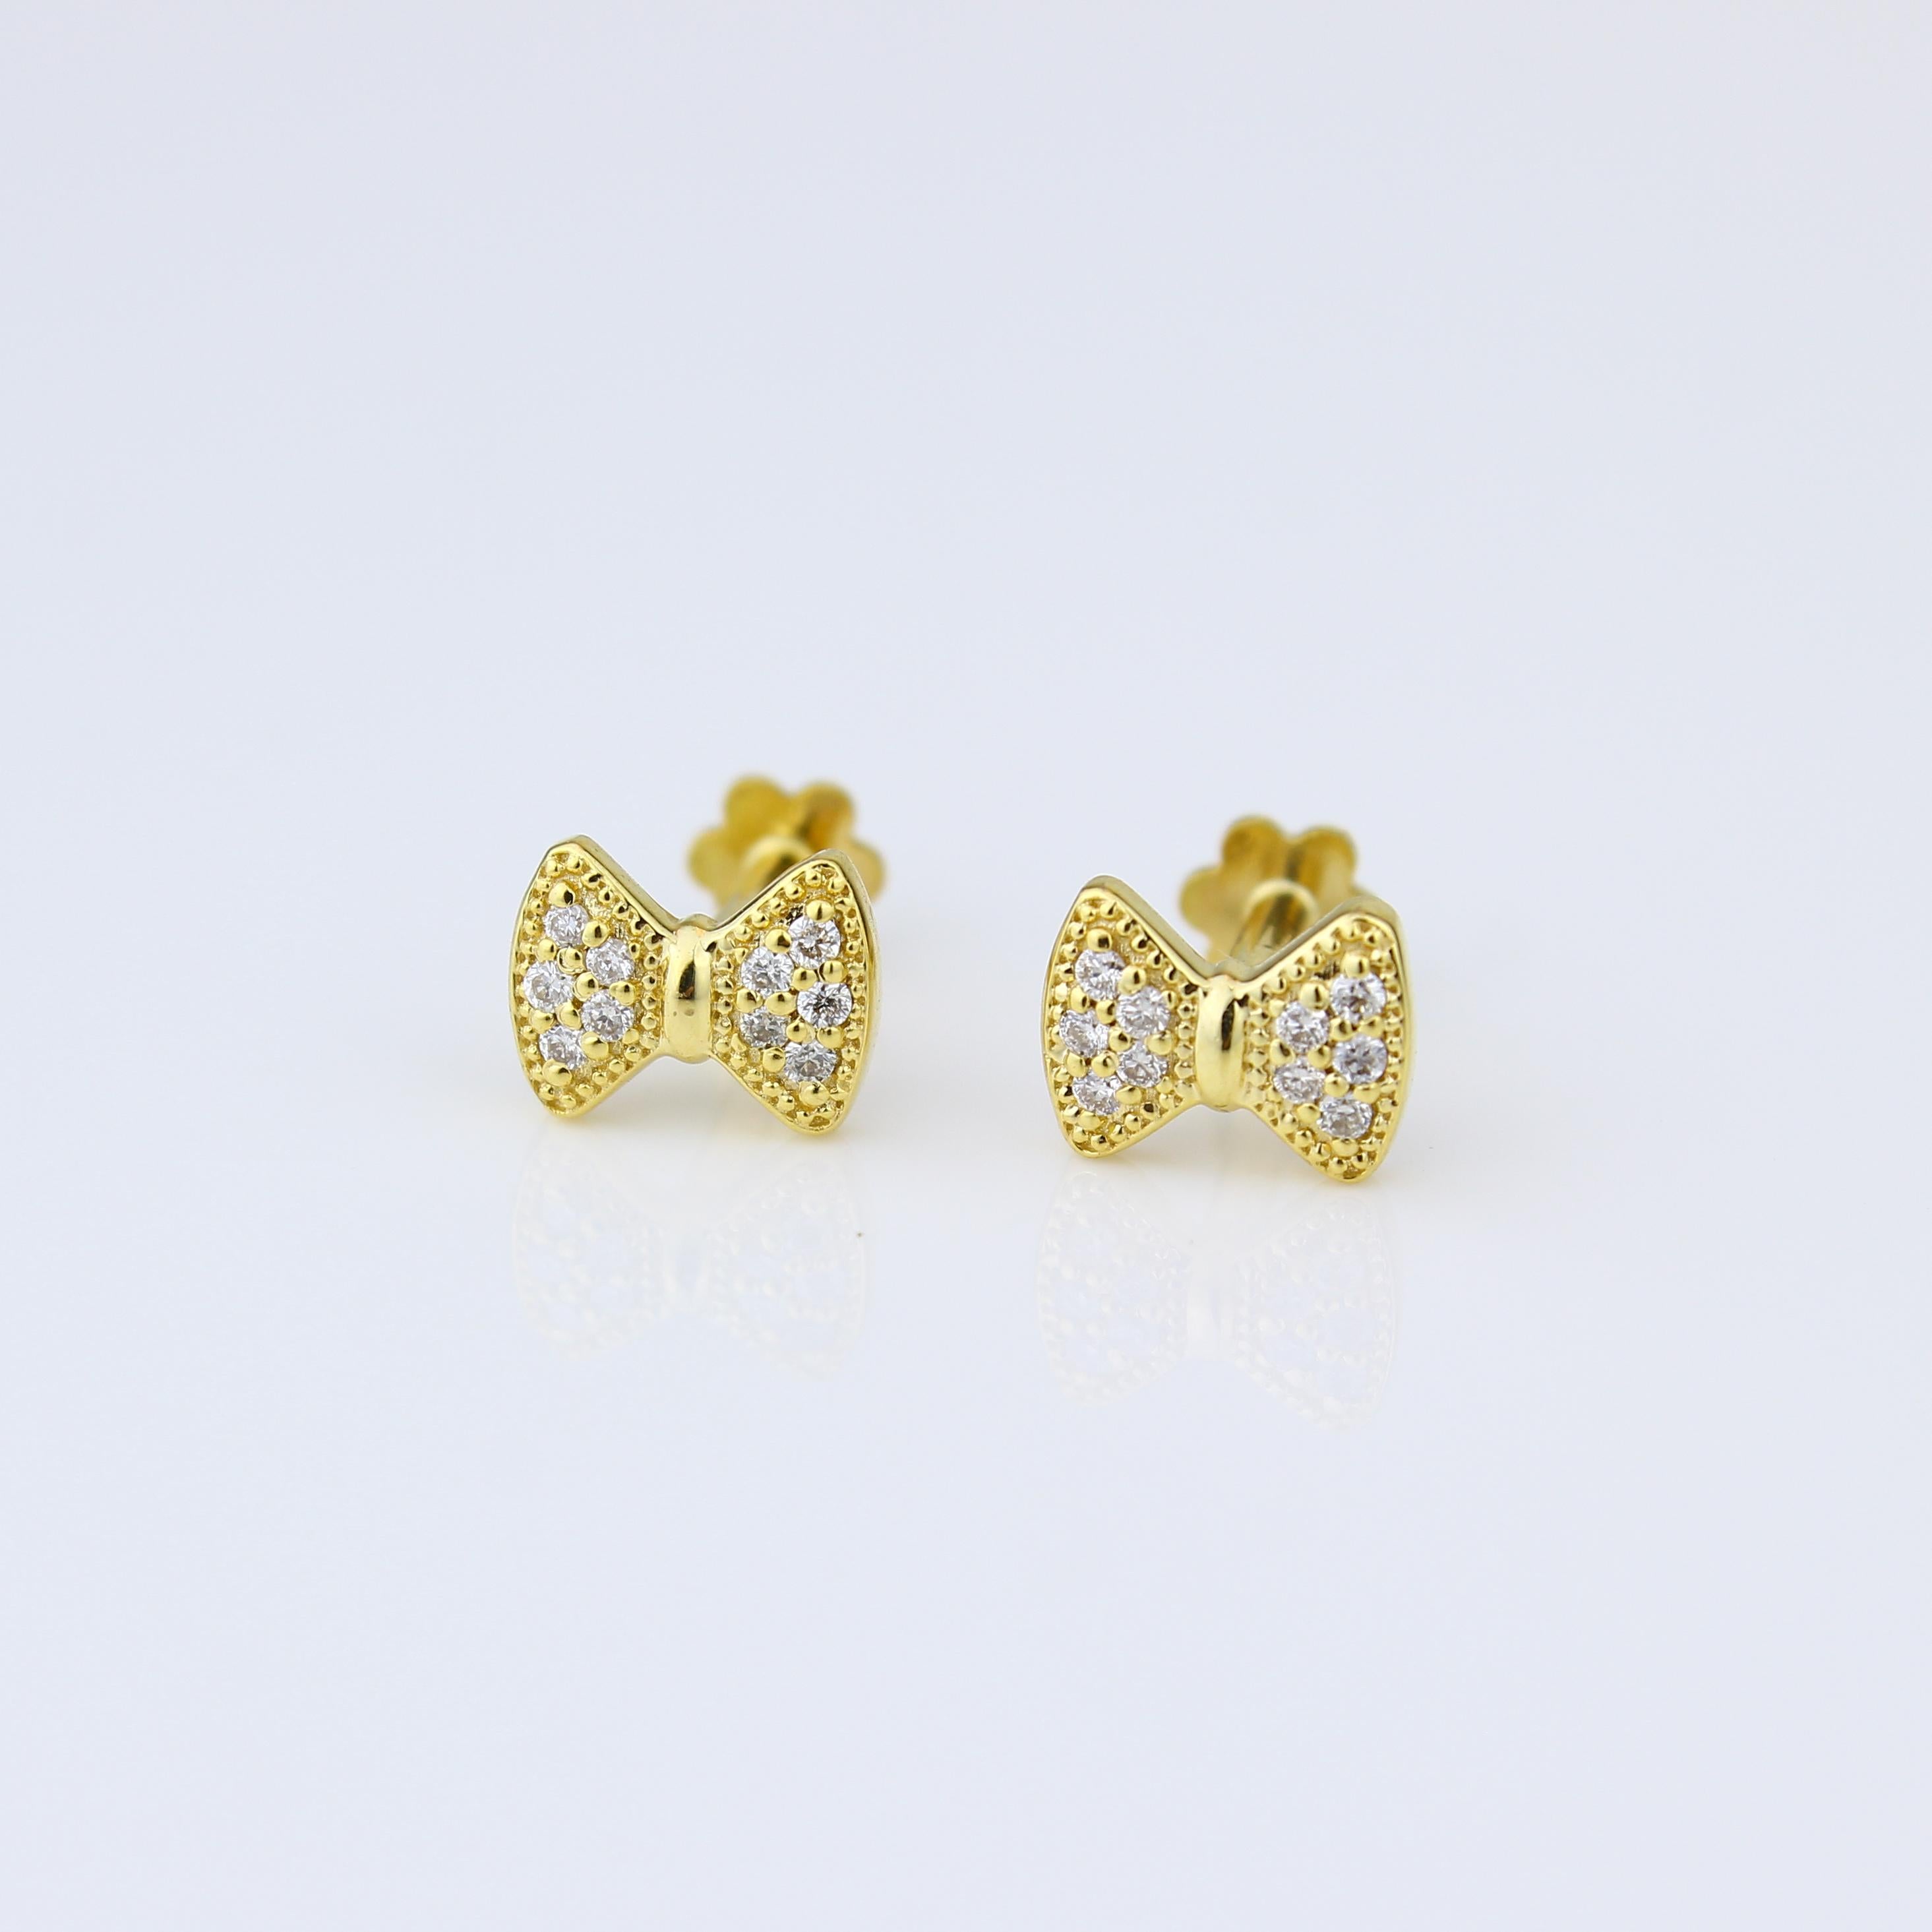 Elegant BOW Diamond Earrings tailored for Girls (Kids/Toddlers) in luxurious 18K Solid Gold. These enchanting earrings showcase graceful bow designs adorned with delicate diamonds, adding a touch of timeless charm to your little one's style, with a